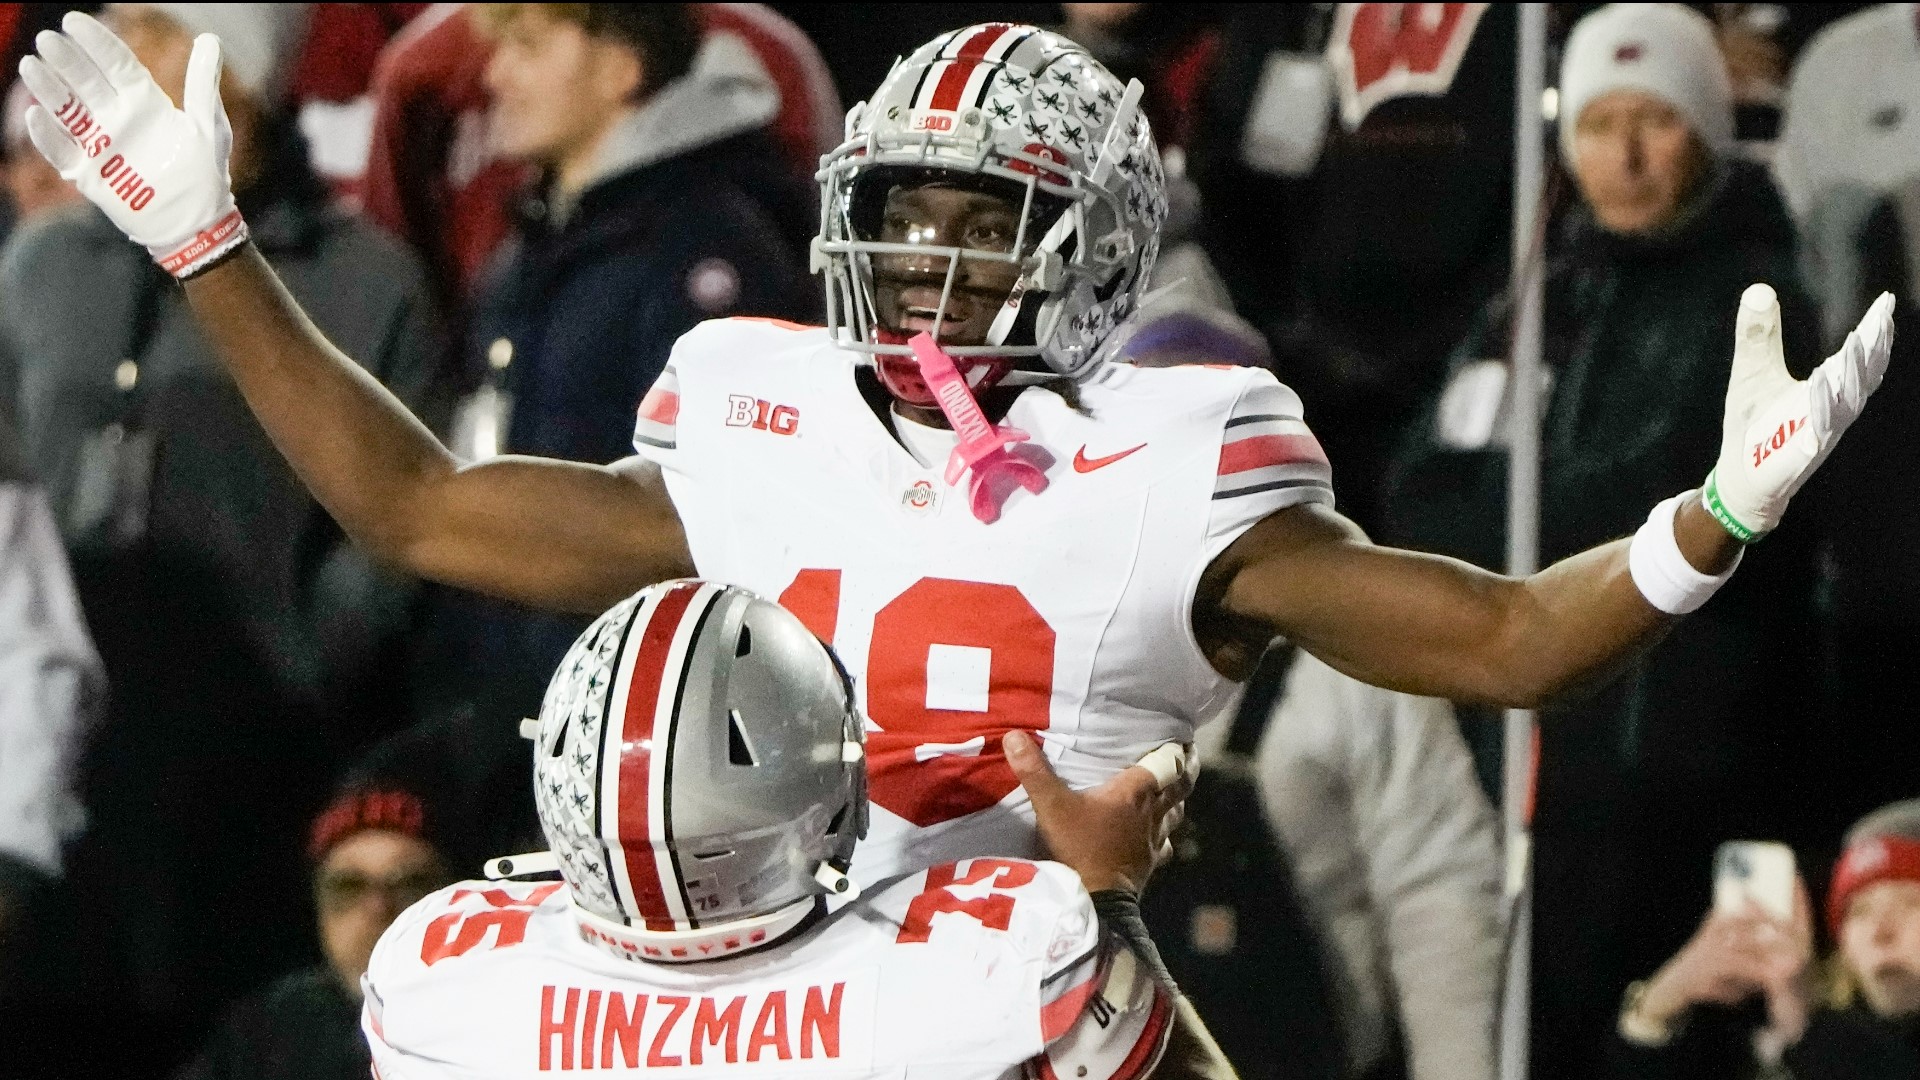 The Buckeyes are coming off a 24-10 road victory against Wisconsin.